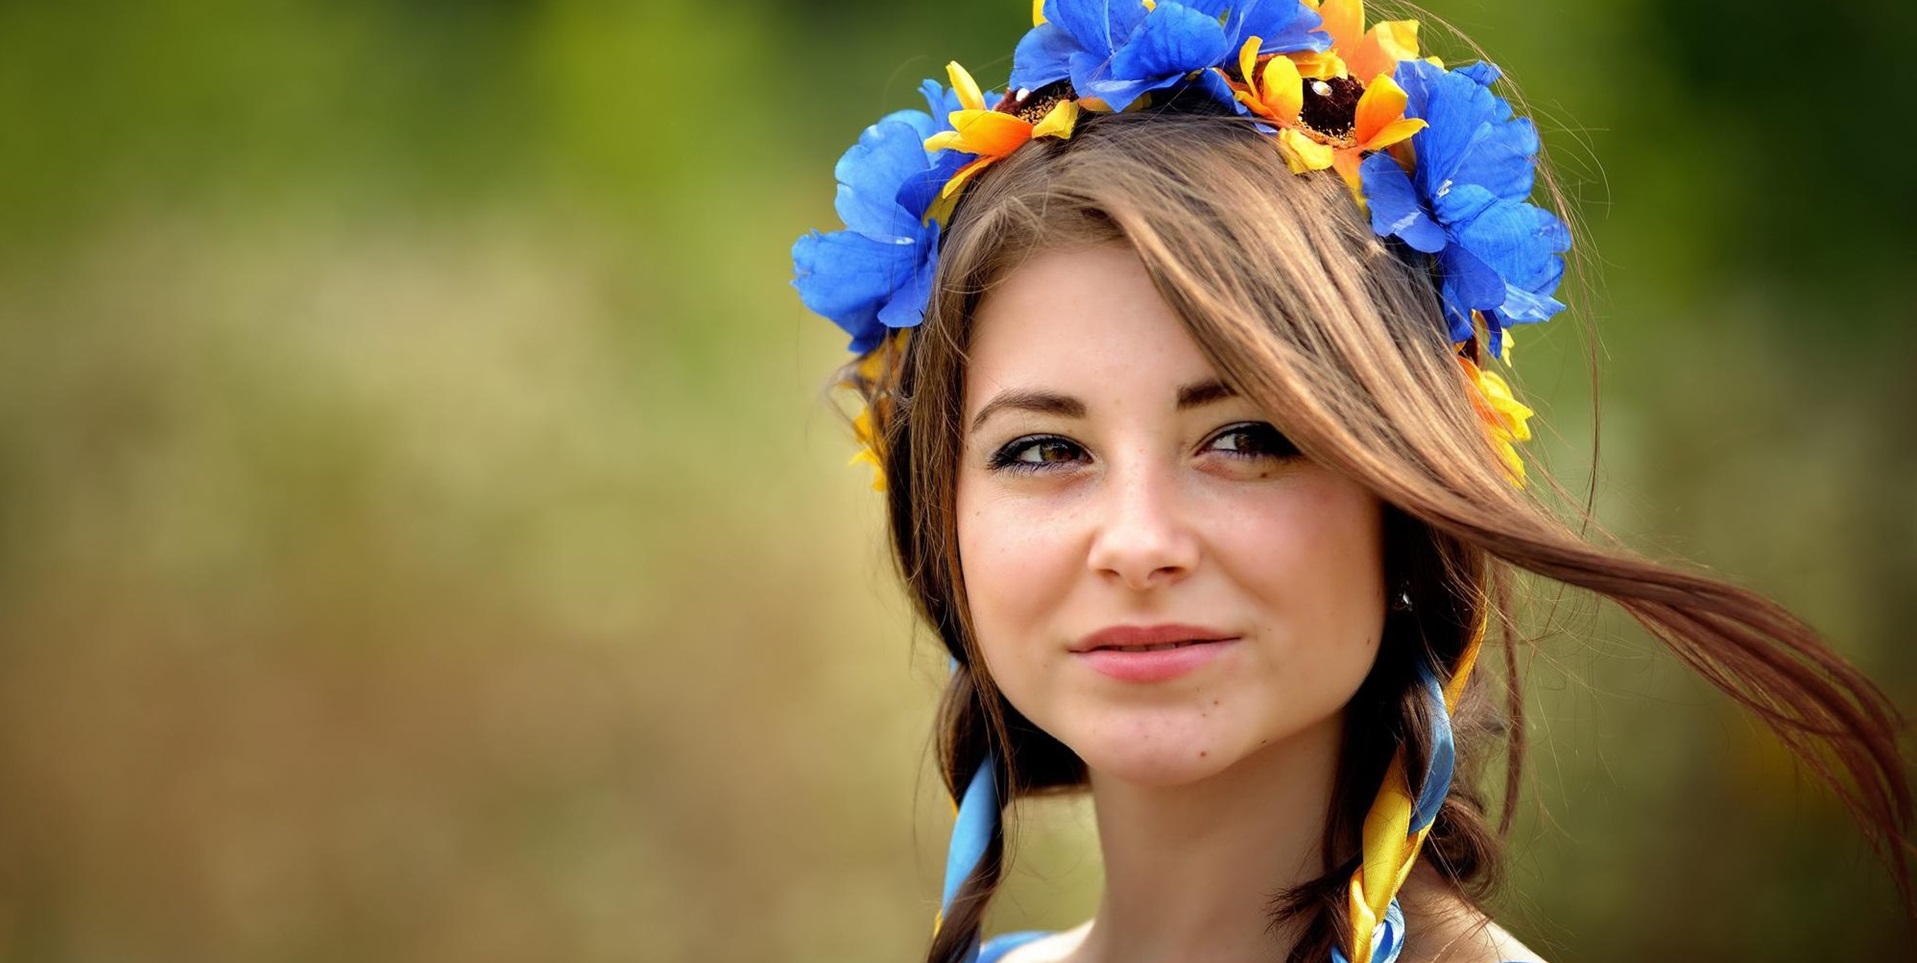 Five Reasons Why Ukrainian Girls Dream Of Marrying A Foreigner